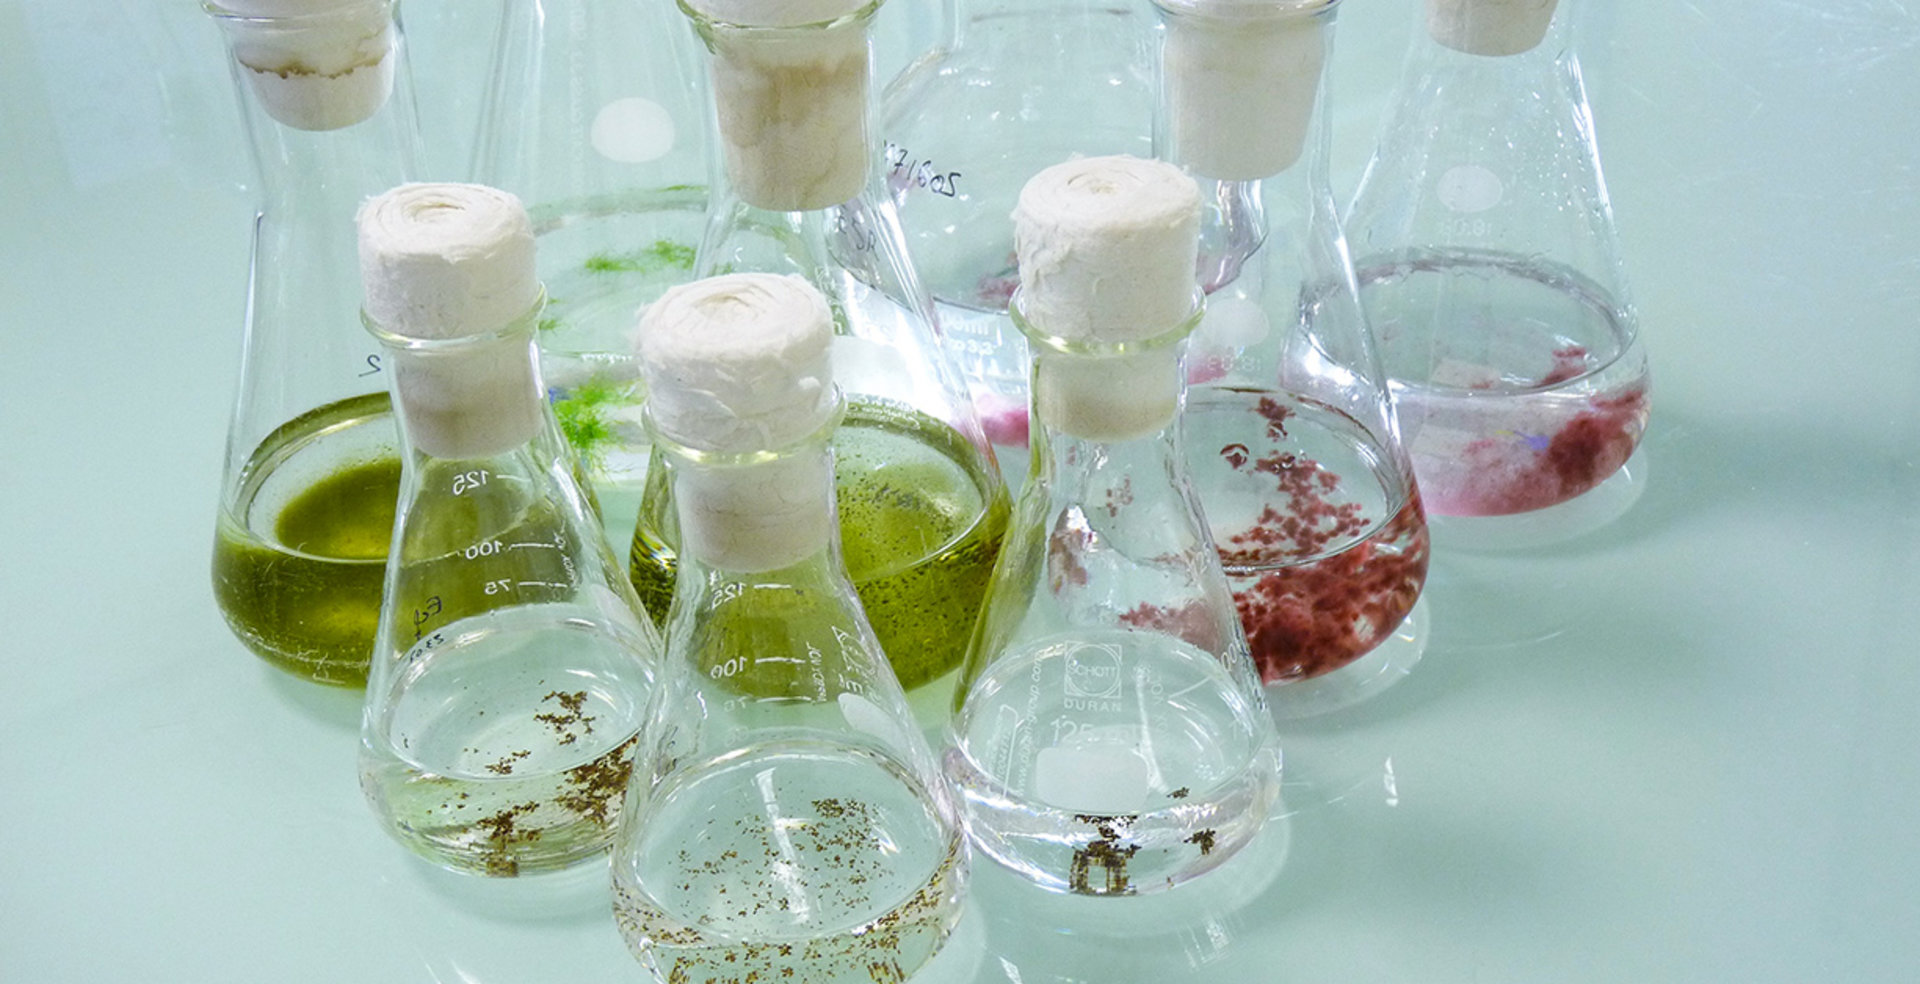 An Innovative Approach To Develop Sustainable Marine Active Ingredients From Macroalgae